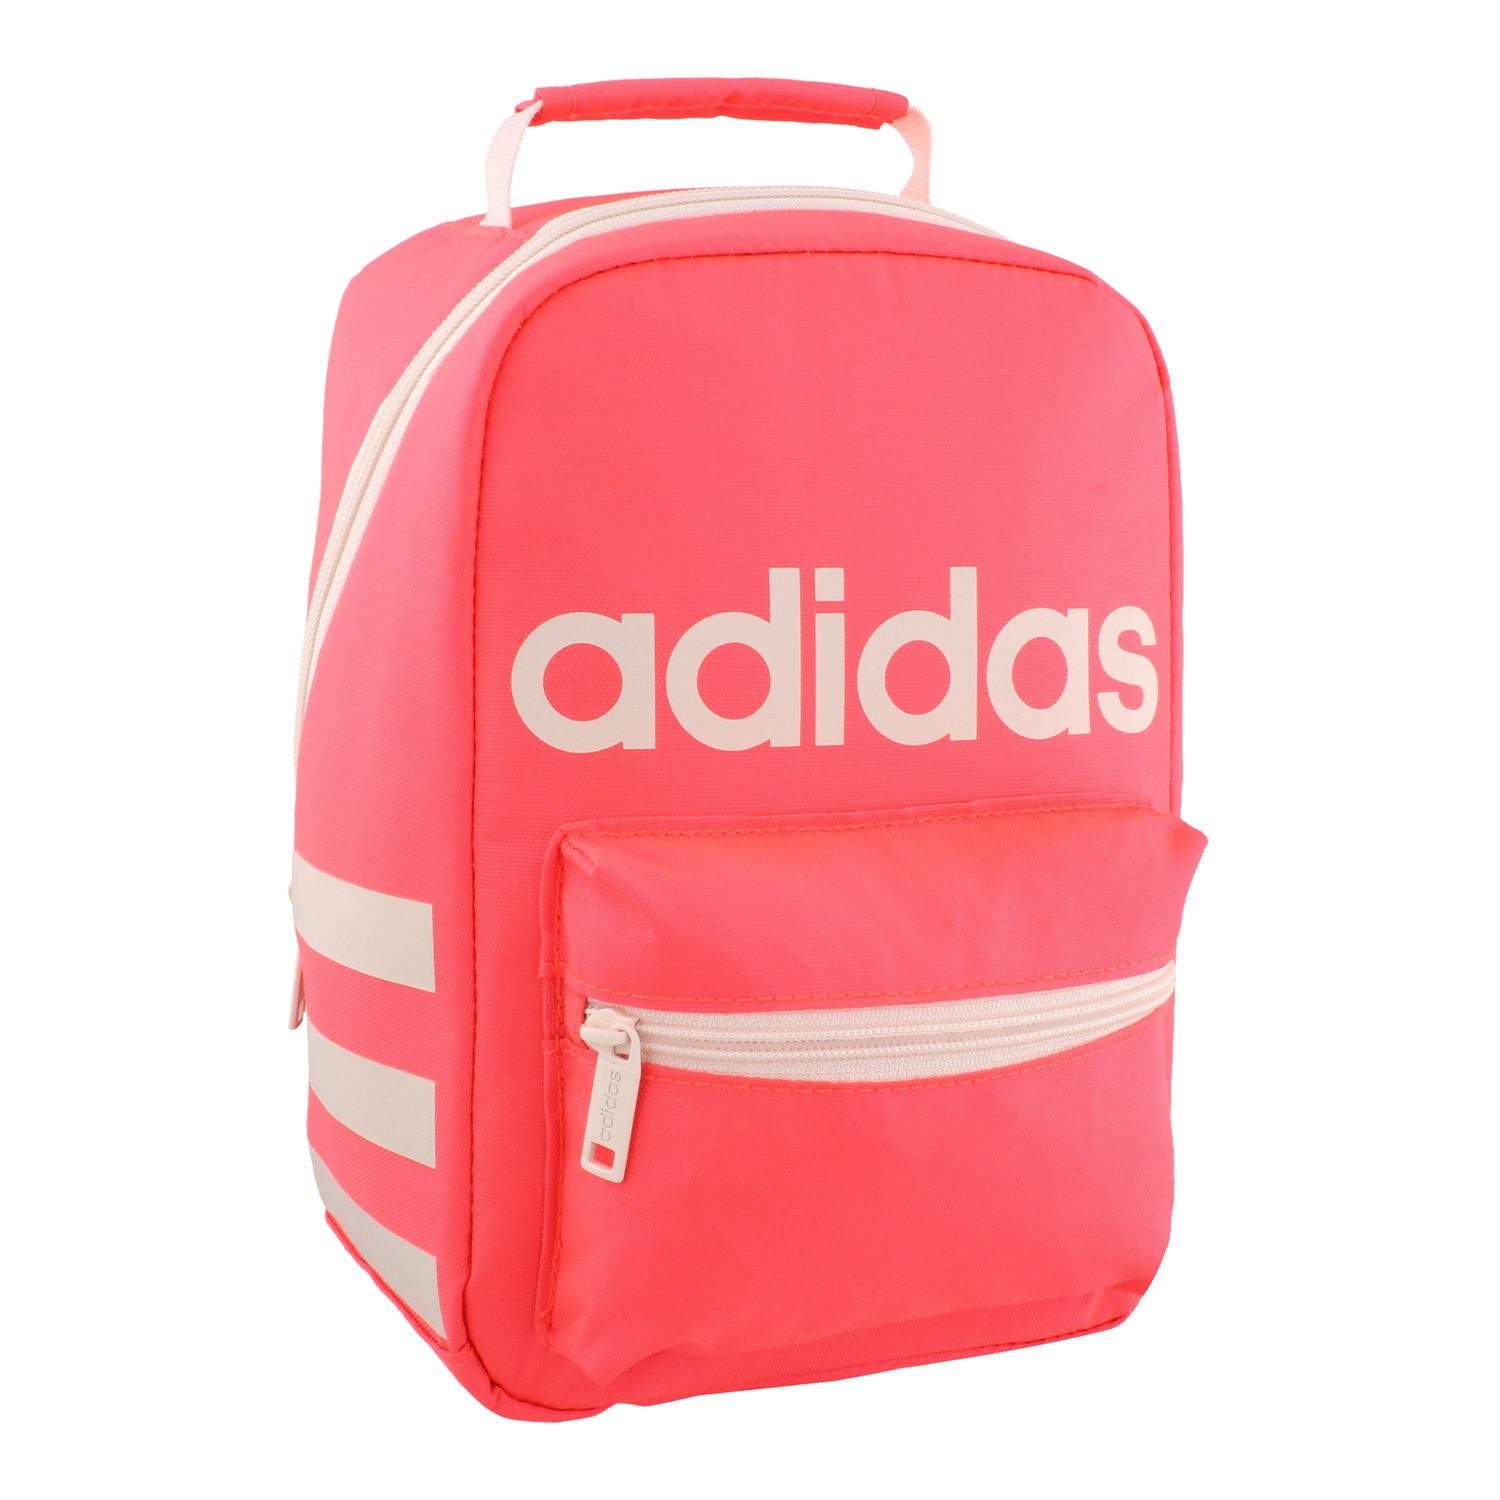 adidas backpack and lunchbox